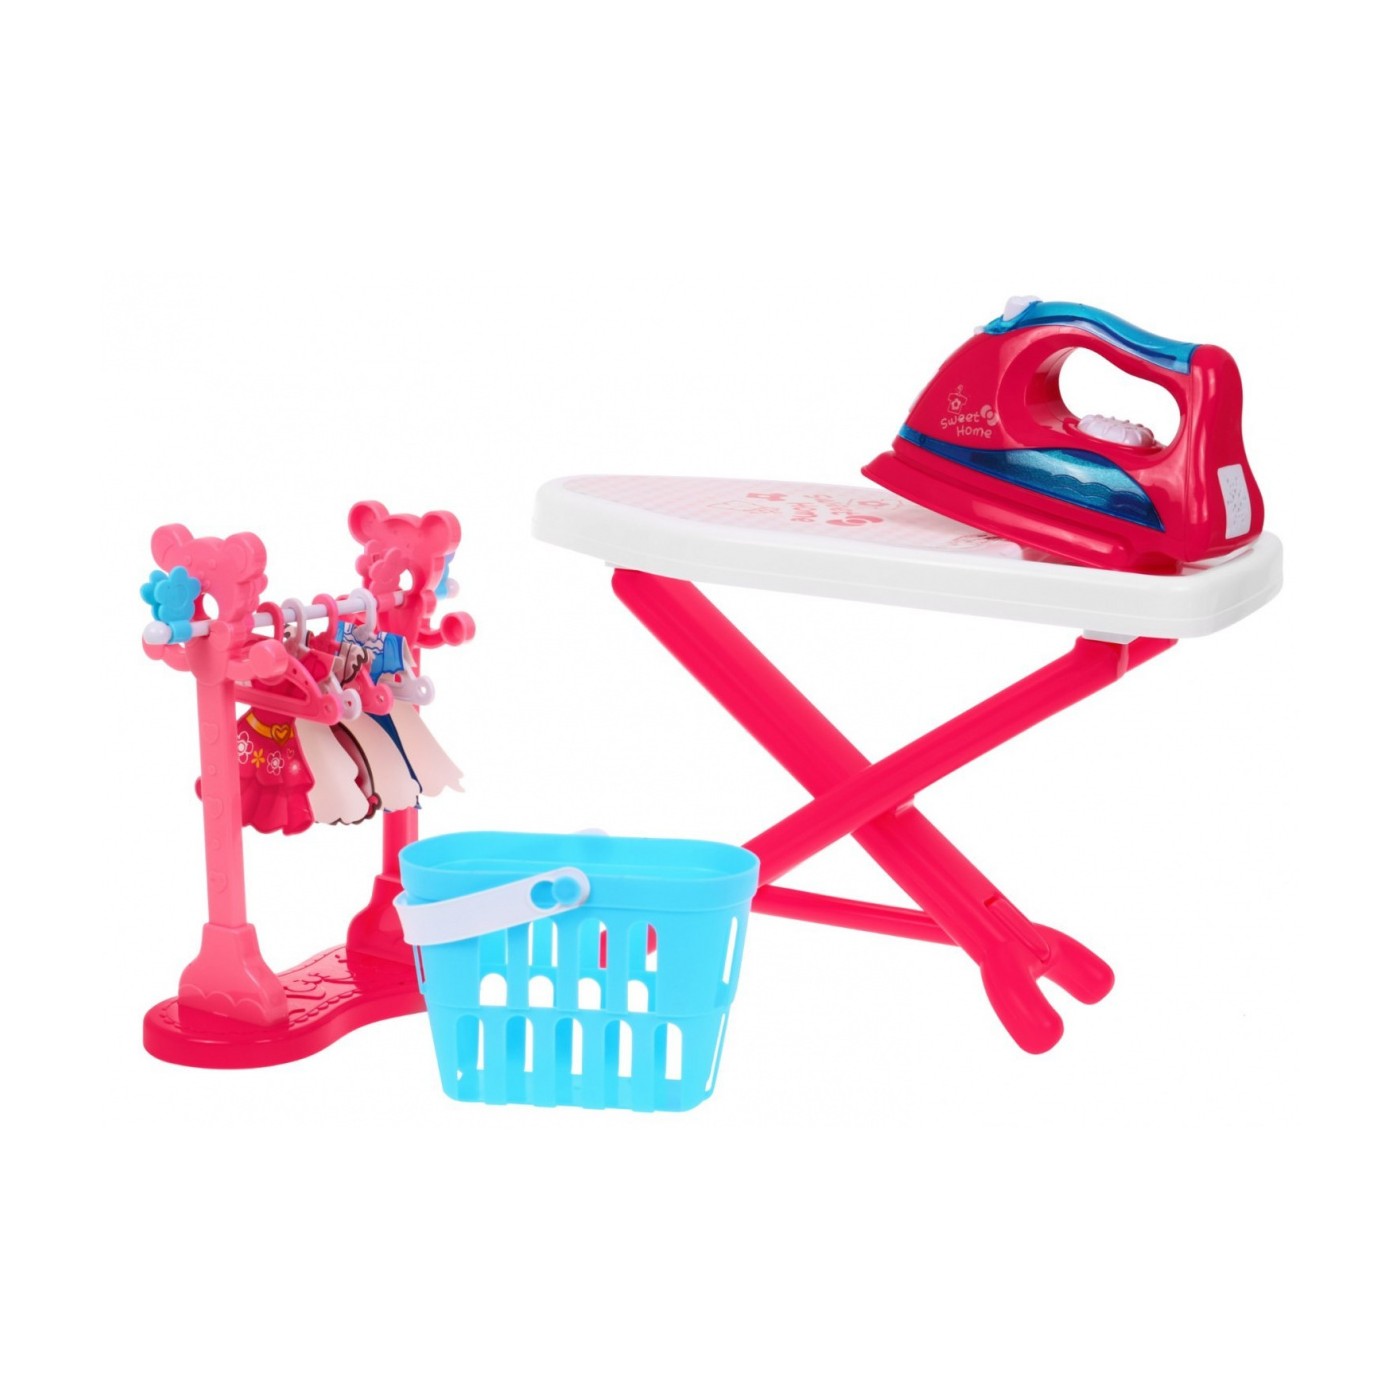 Ironing board, iron with steam + accessories